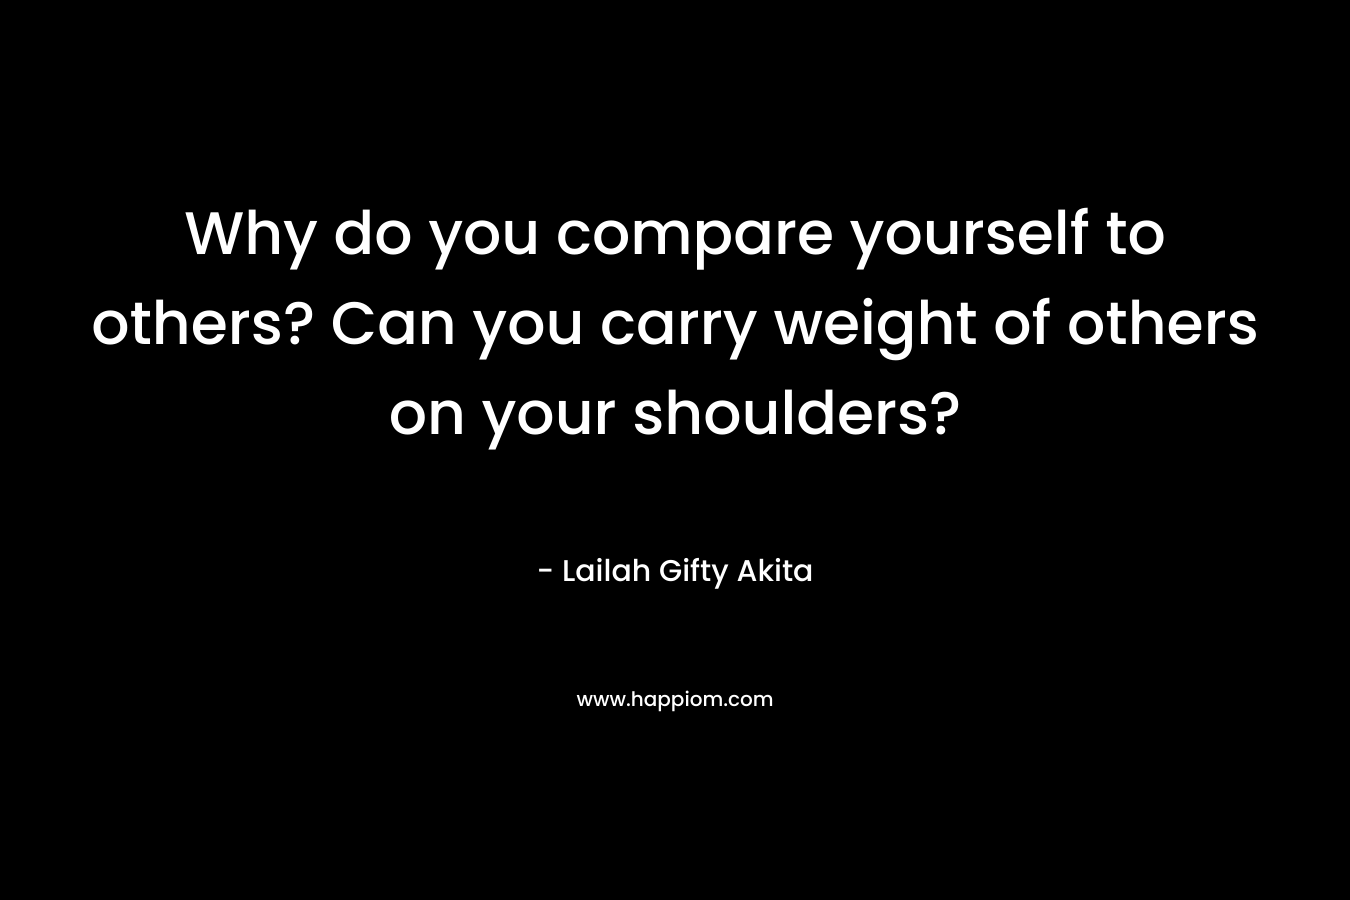 Why do you compare yourself to others? Can you carry weight of others on your shoulders?